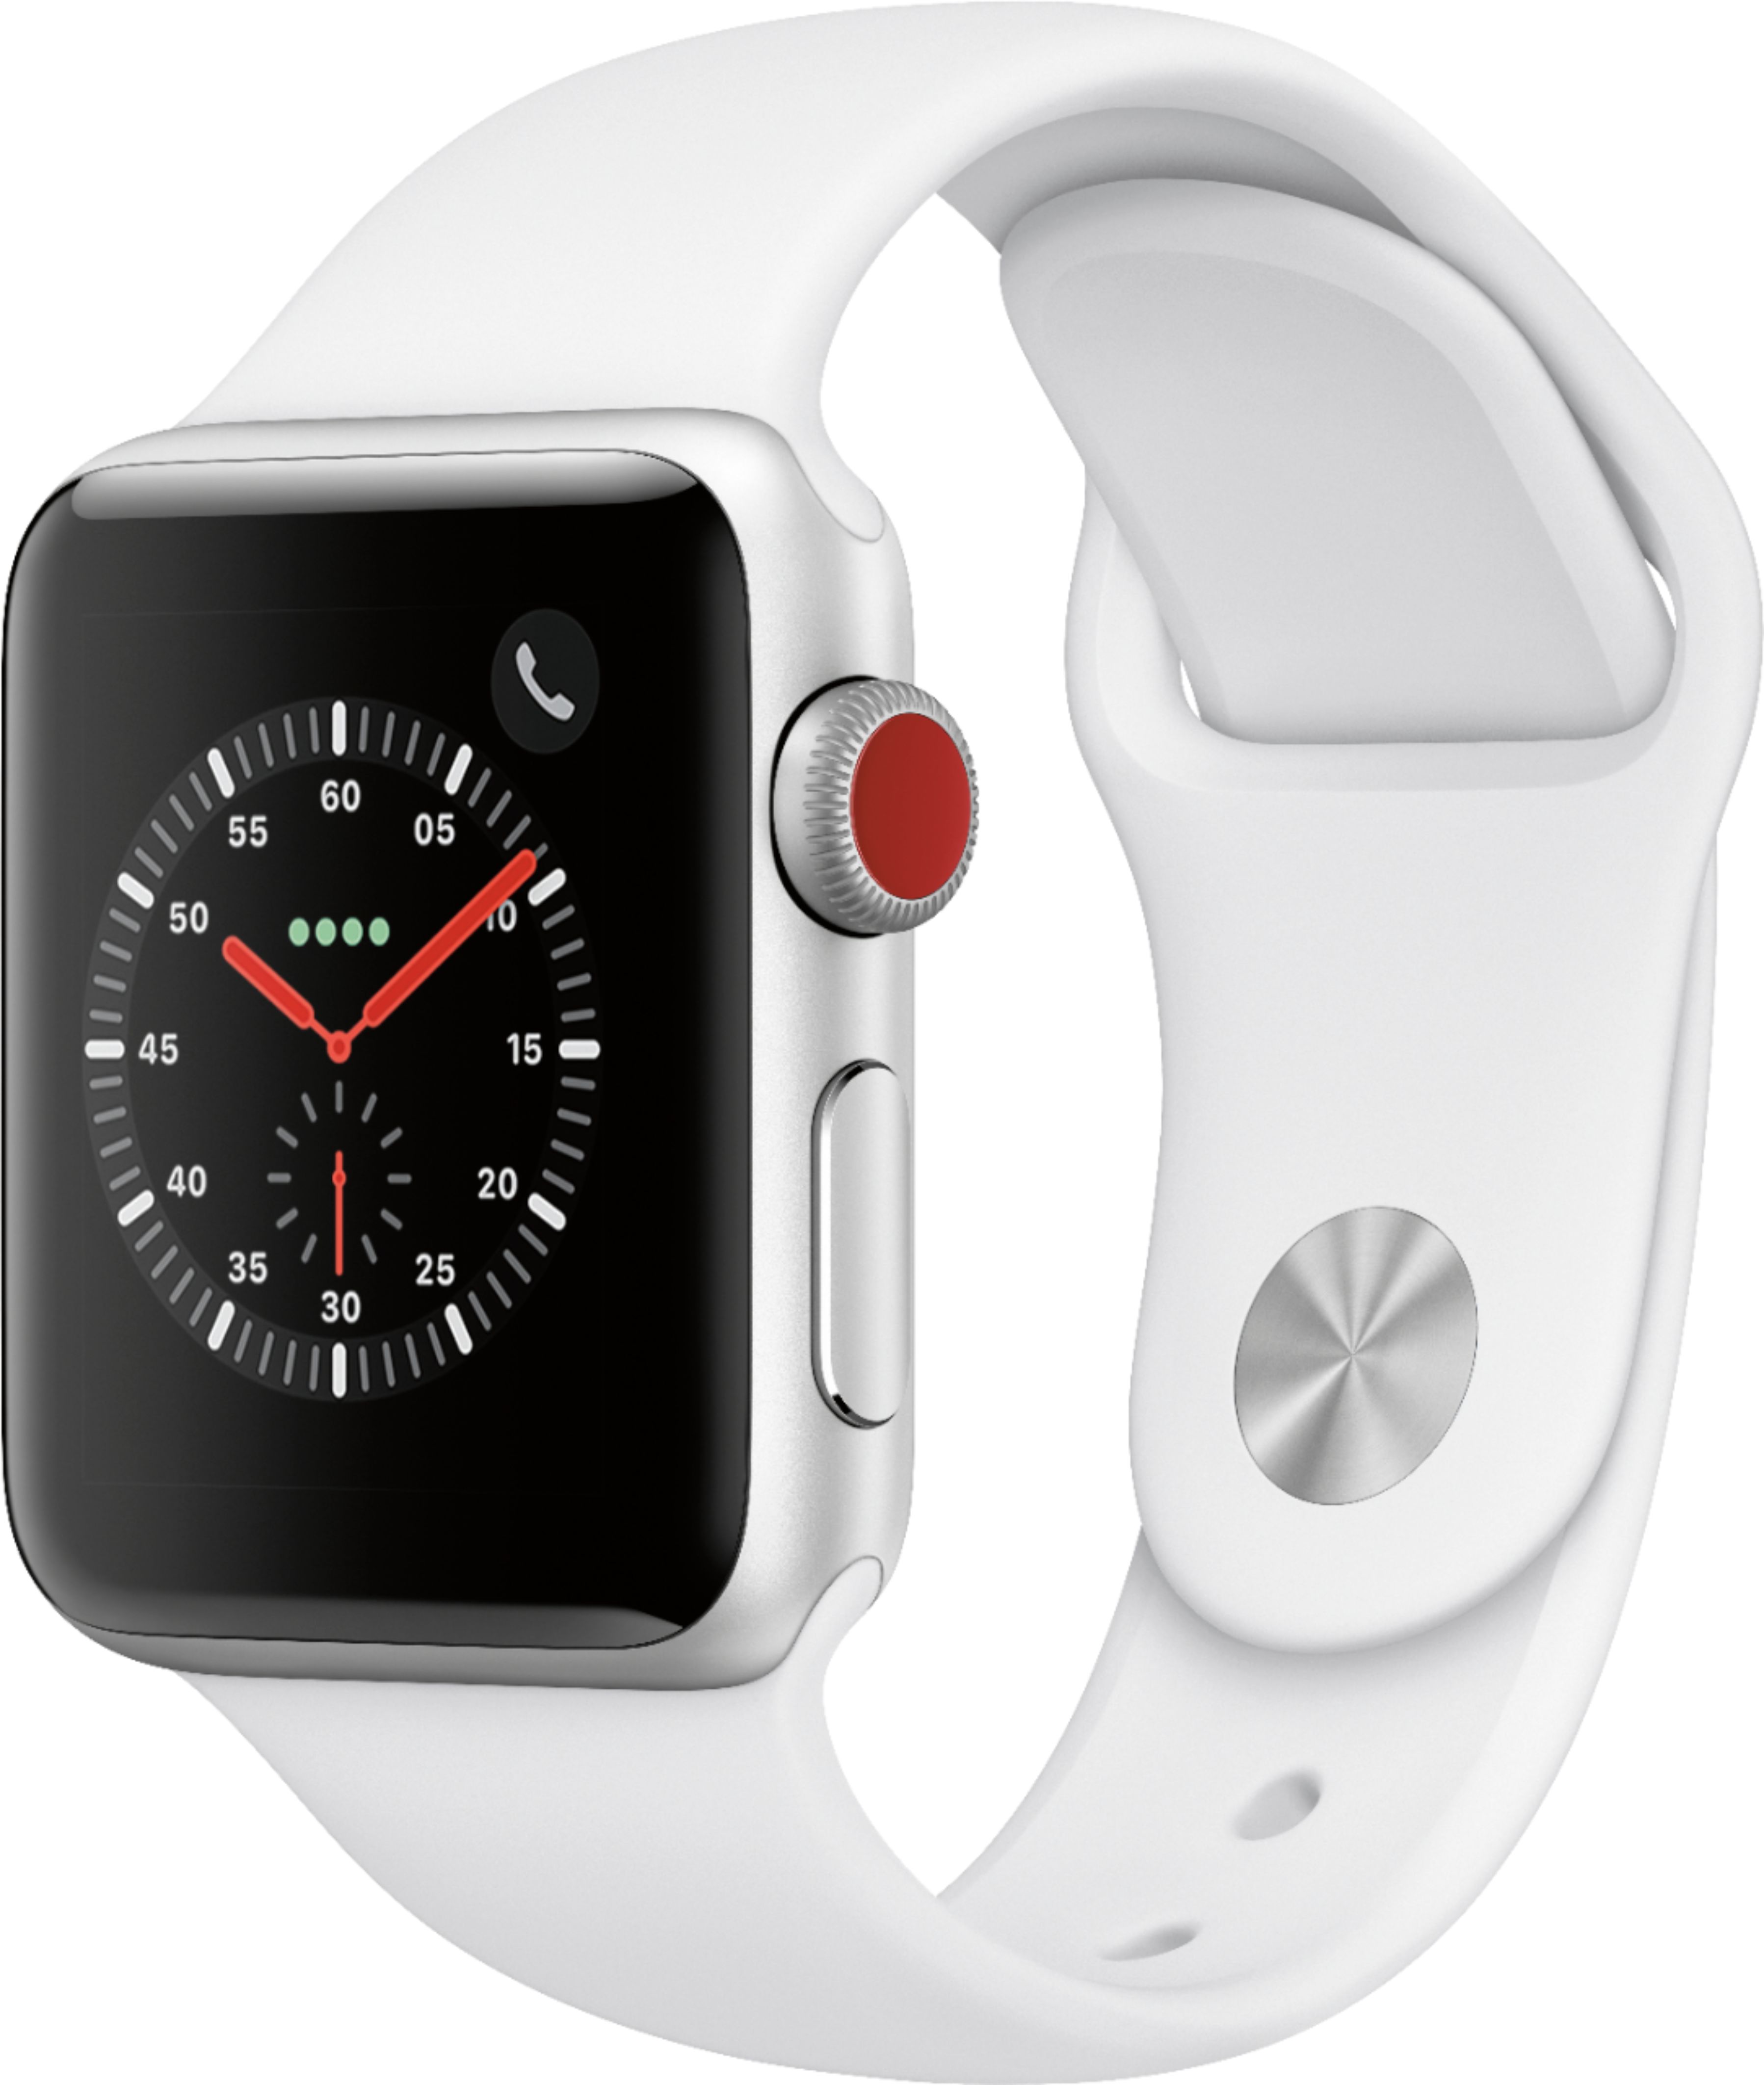 GSRF Apple Watch Series 3 (GPS + Cellular) 38mm Silver Aluminum Case with White Sport Band - Silver Aluminum